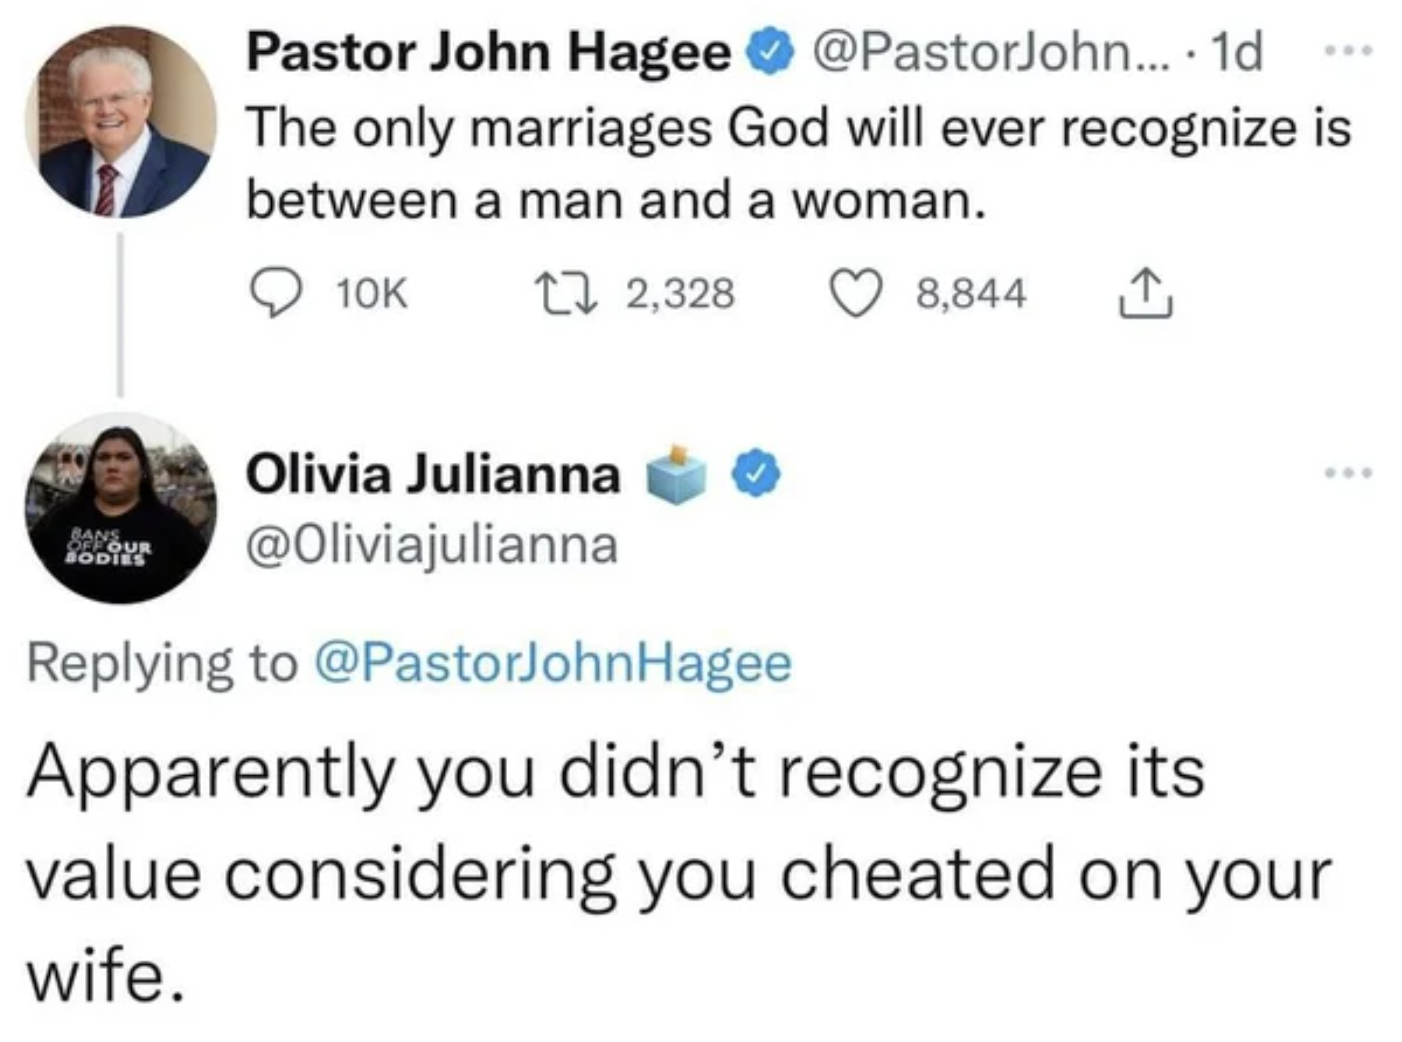 facepalms and fails - dan howell old tweets - Bodies Pastor John Hagee .... 1d The only marriages God will ever recognize is between a man and a woman. 10K 12,328 Olivia Julianna 8,844 www Hagee Apparently you didn't recognize its value considering you ch